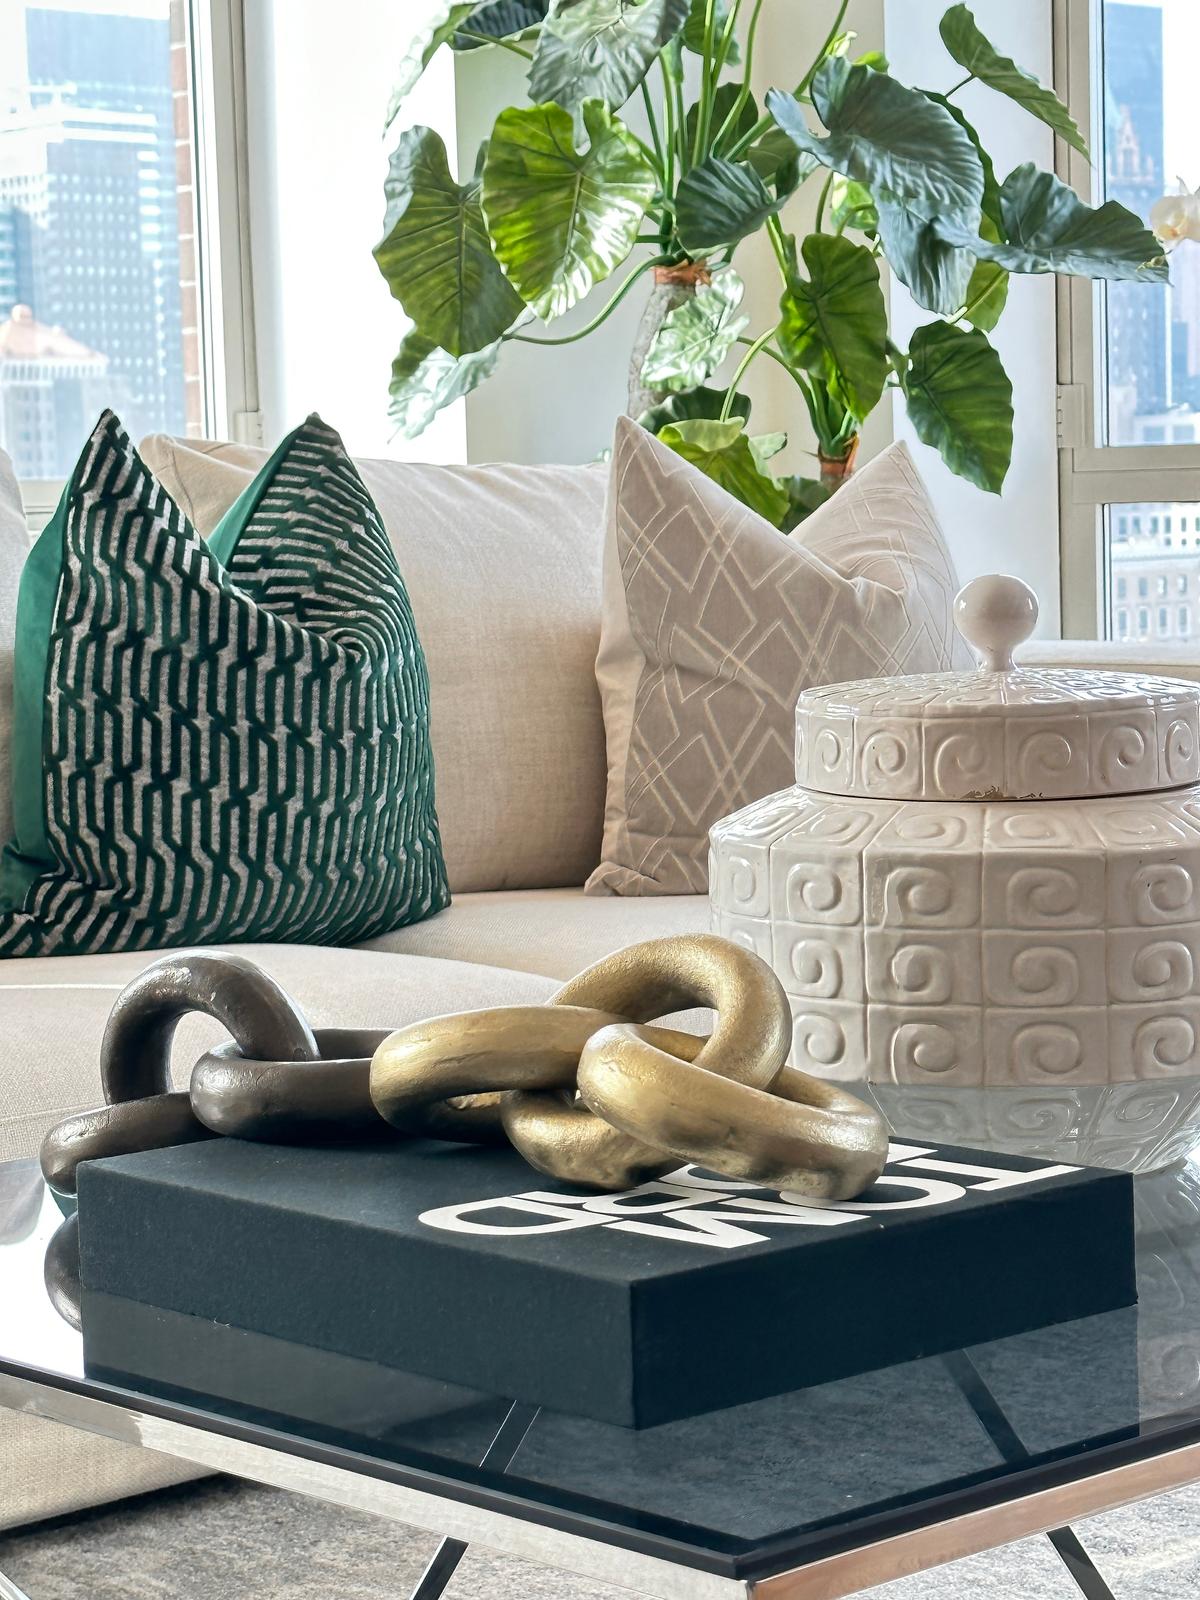 Greenery and other green accents help add a bright, vibrant pop of color. (Handout/TNS)